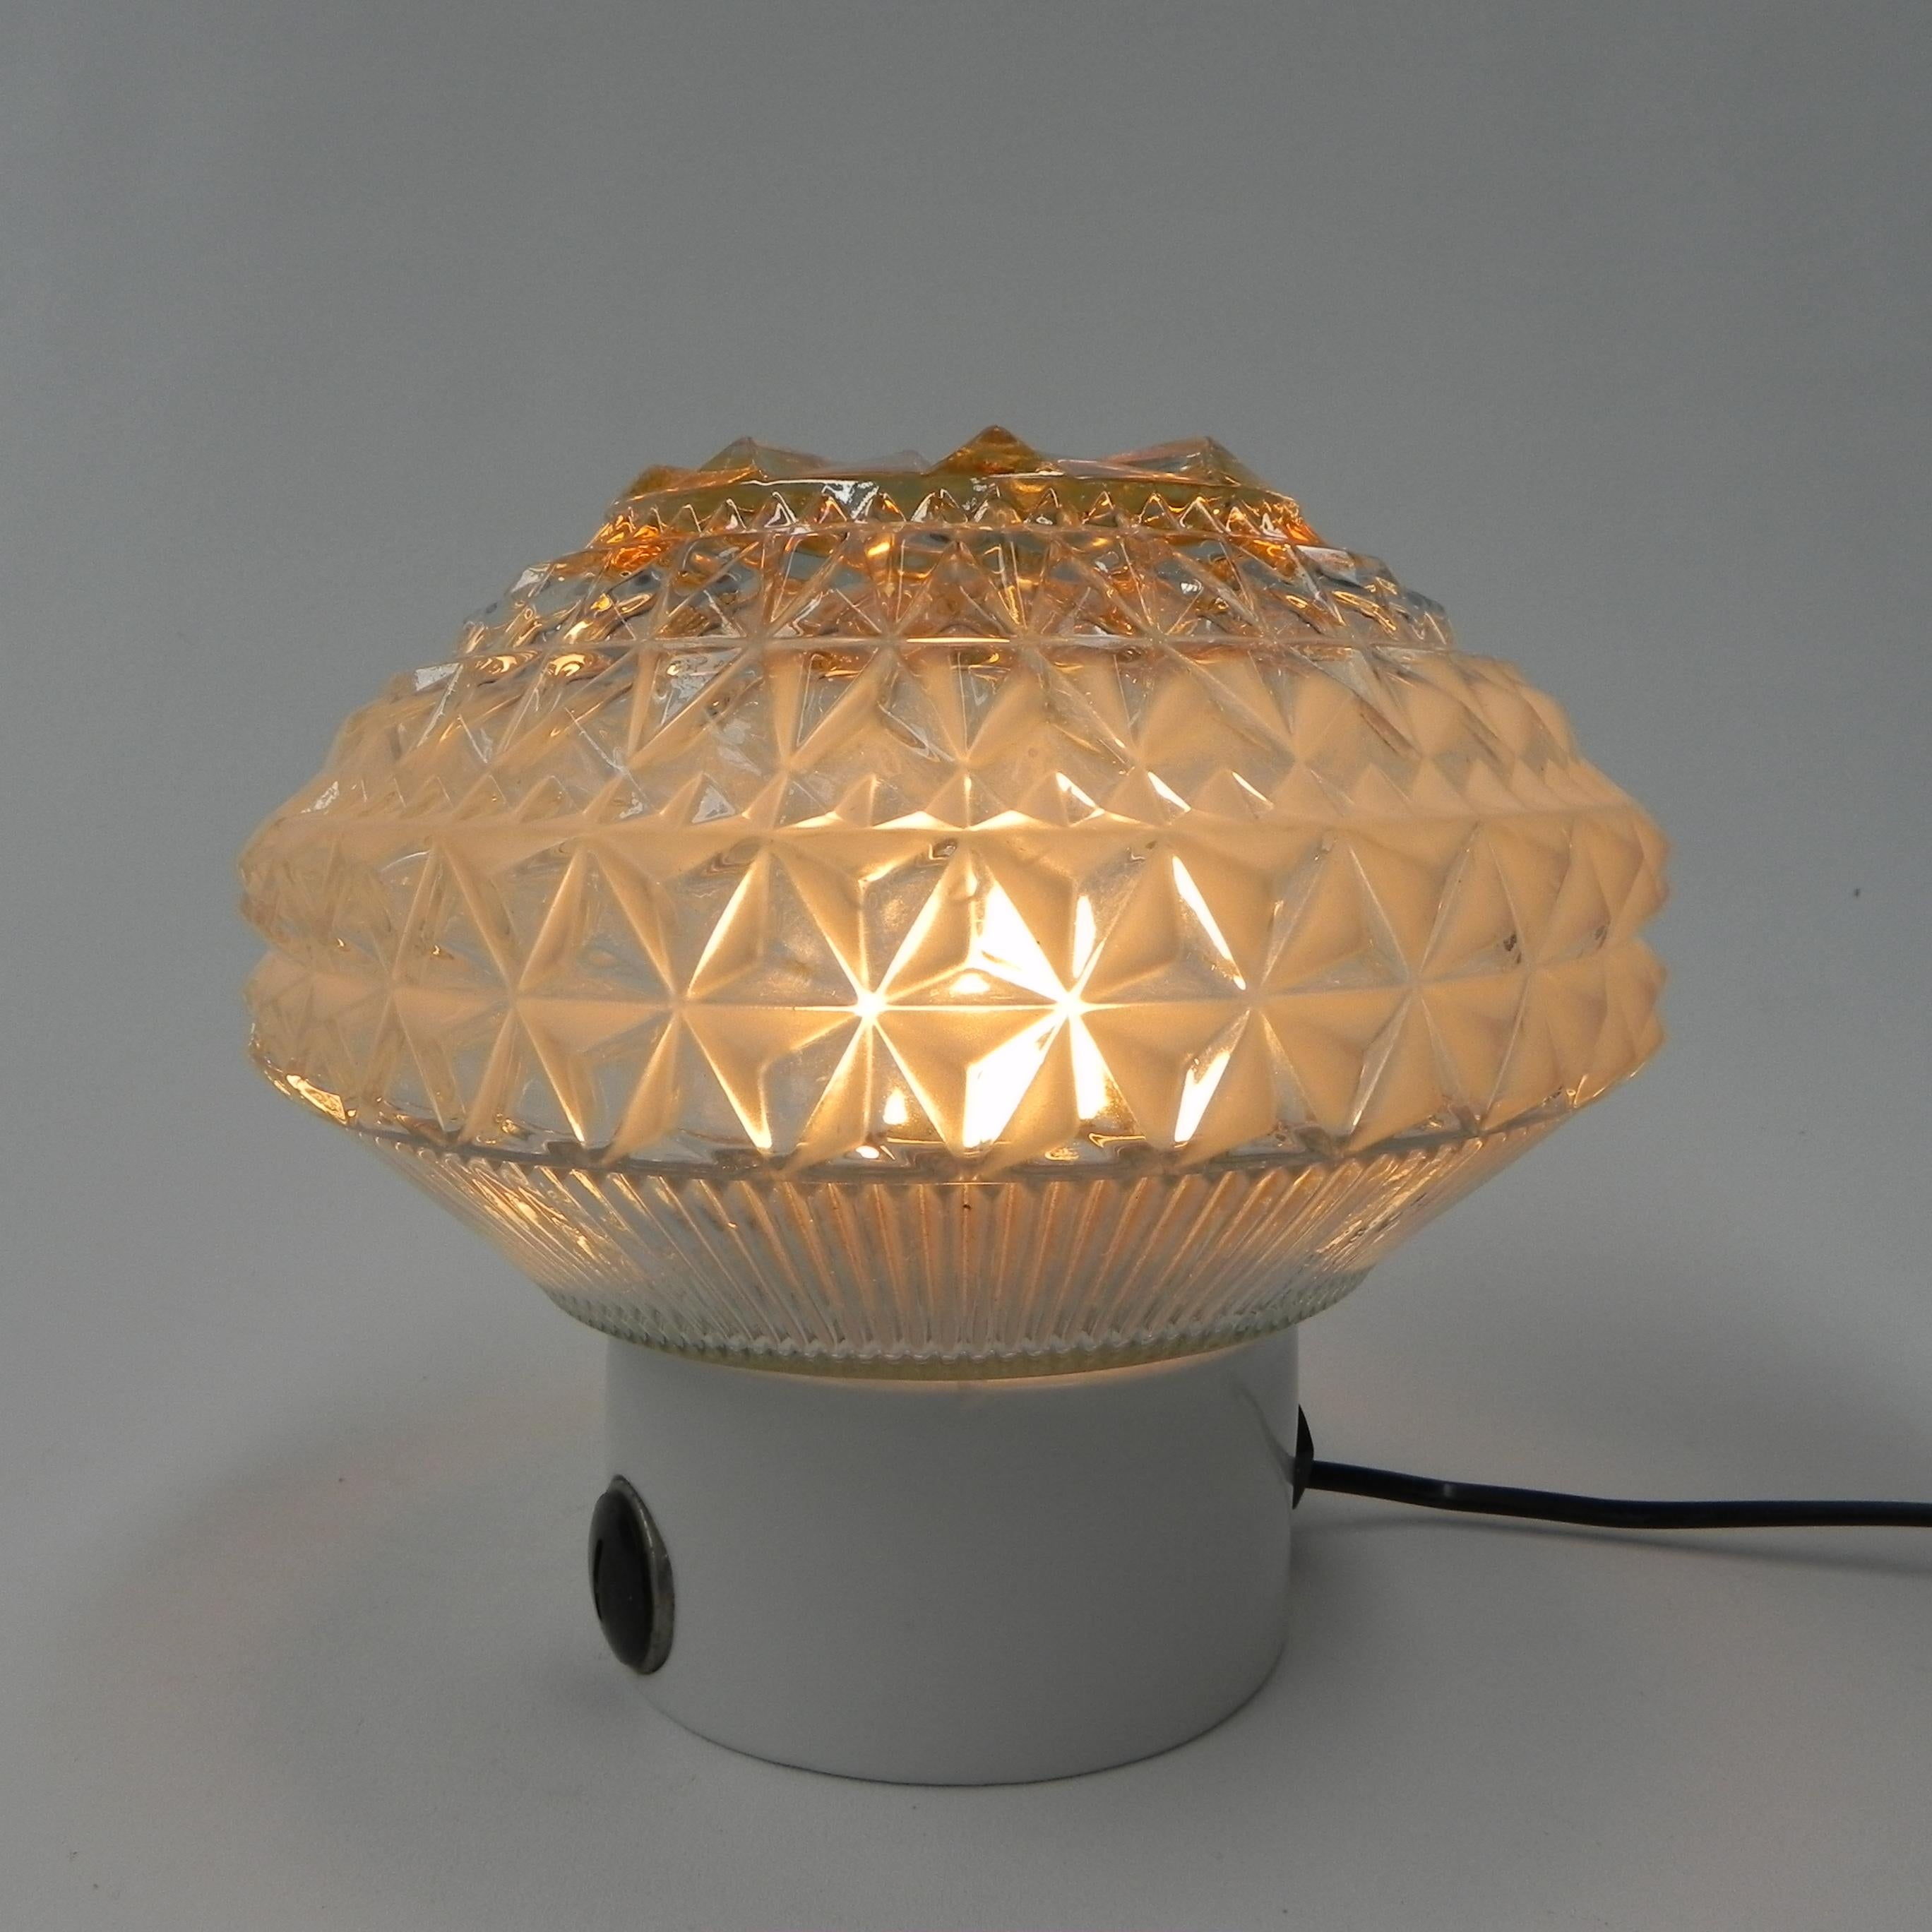 Height: 21 cm.
diameter: 20 cm.
The lamp is equipped with a large bulb holder (E27).
Origin: Germany, 1960s.
Material: glass / porcelain.
All our lamps are suitable for LED lamps.